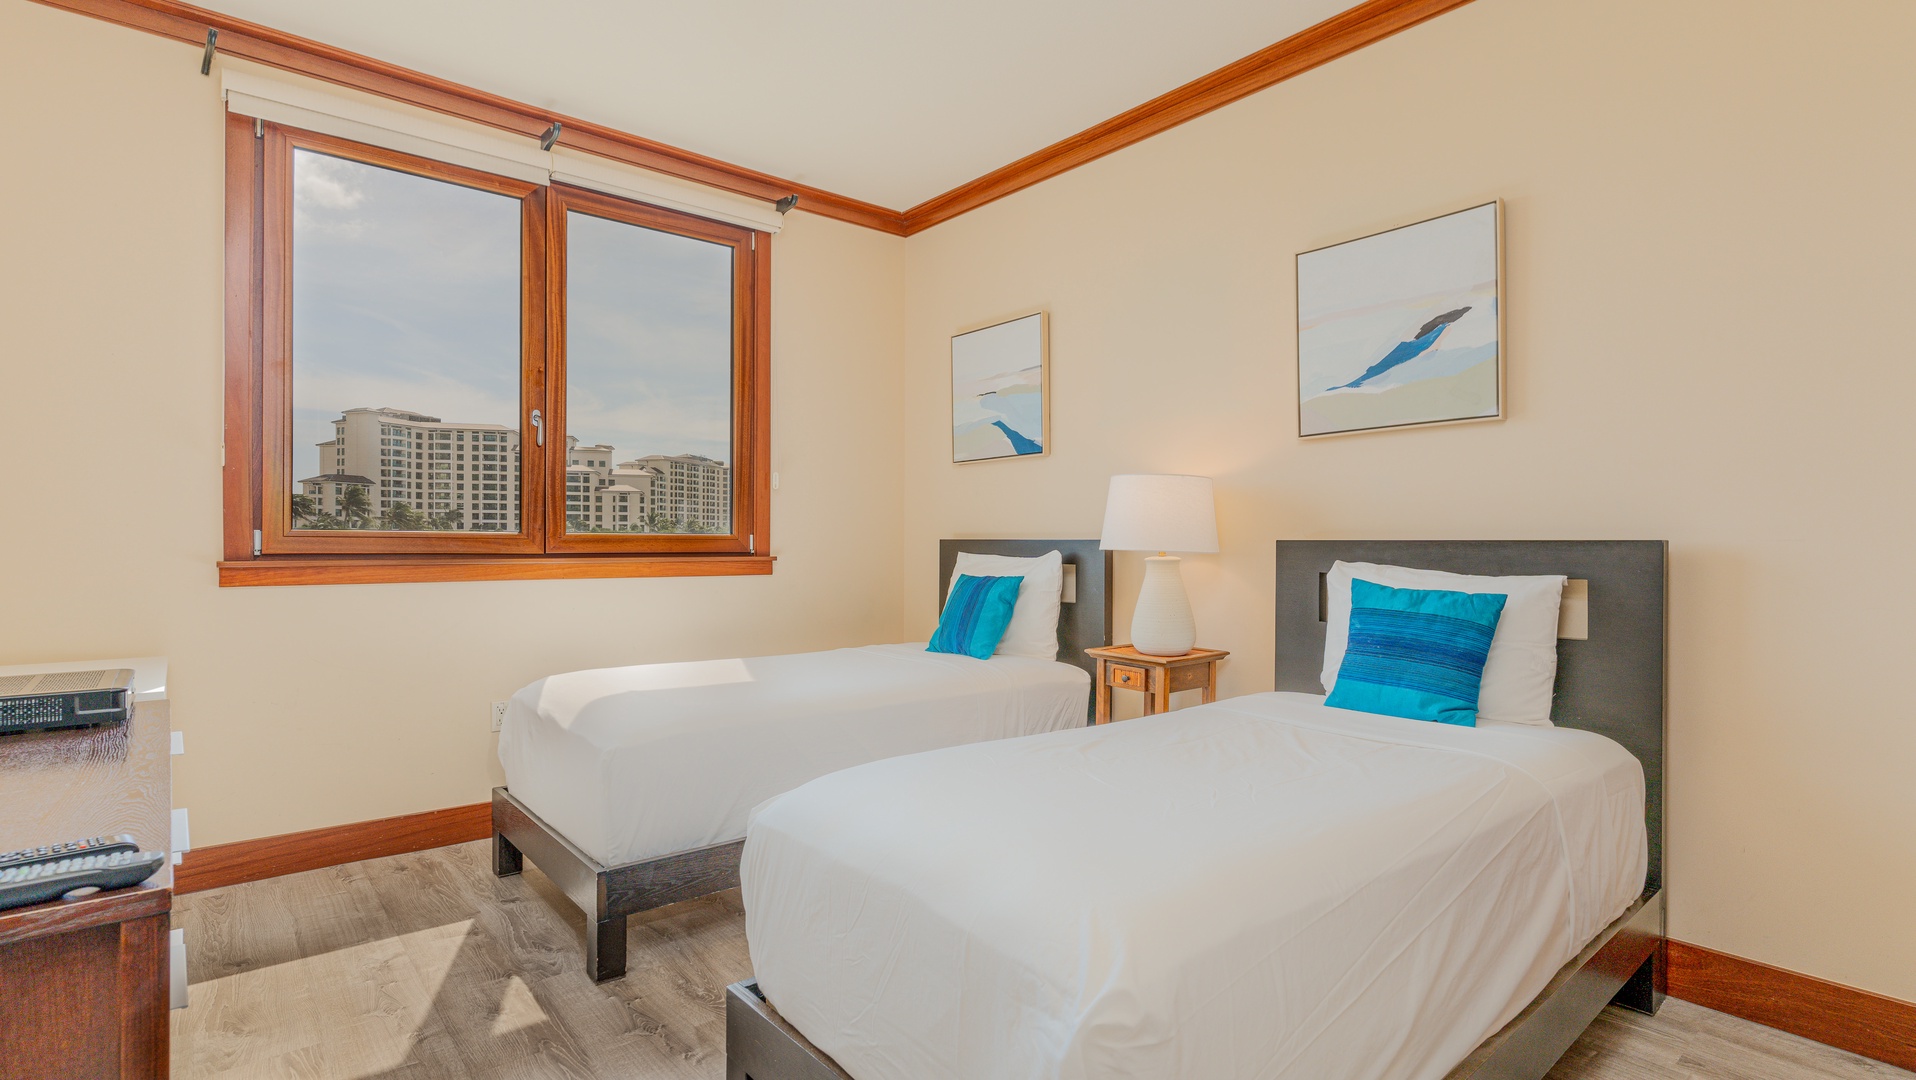 Kapolei Vacation Rentals, Ko Olina Beach Villas O425 - The second guest bedroom with twin beds that can be converted in to a king bed.